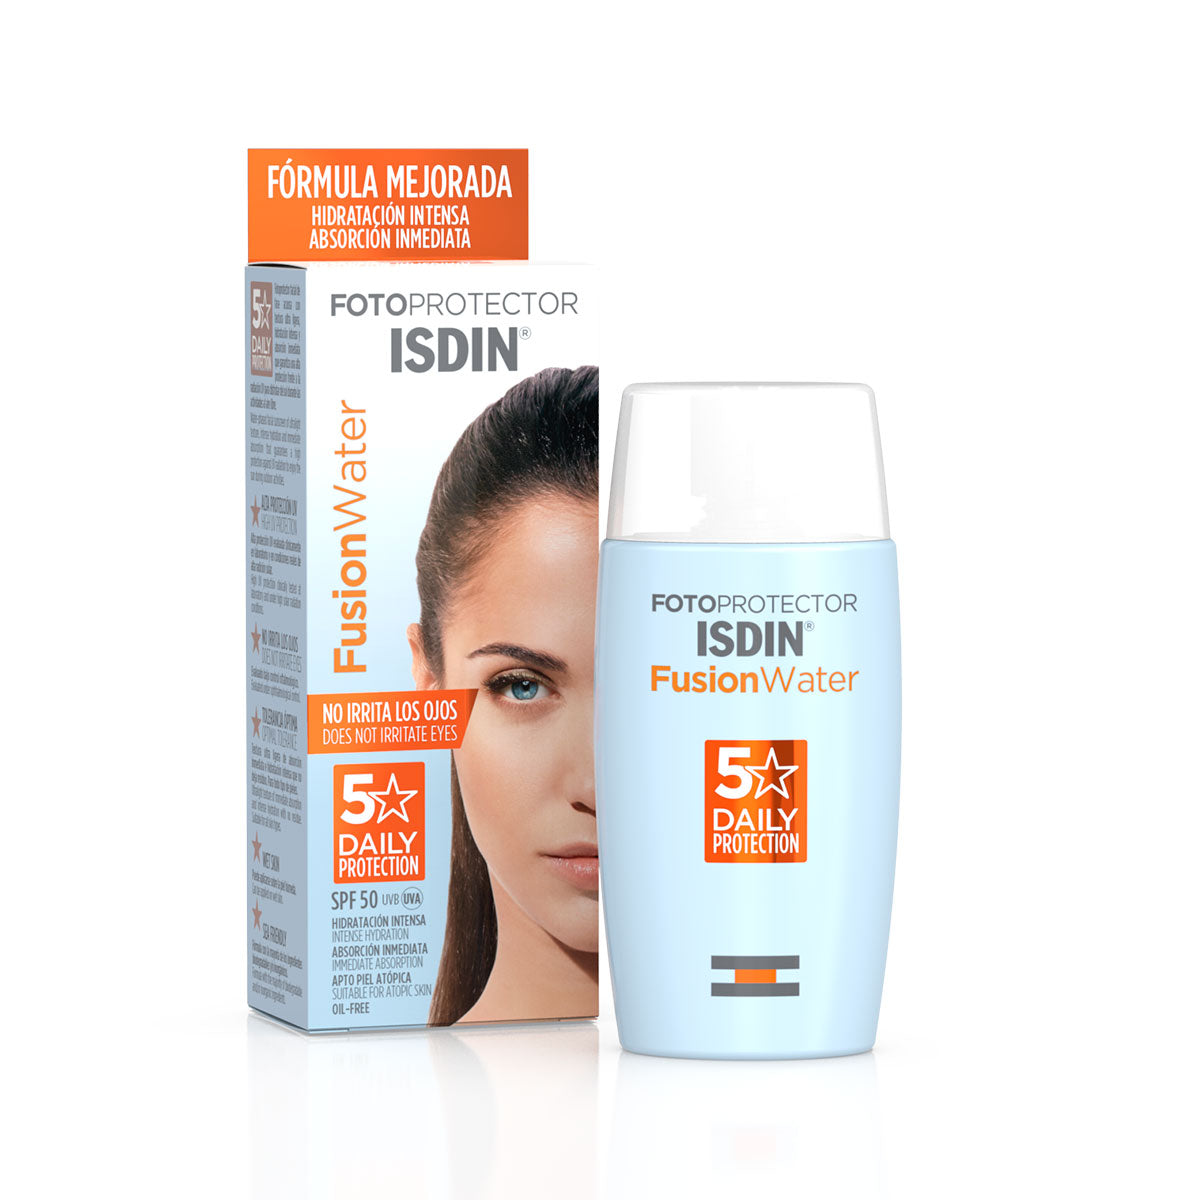 FOTOPROTECTOR ISDIN Fusion Water SPF 50